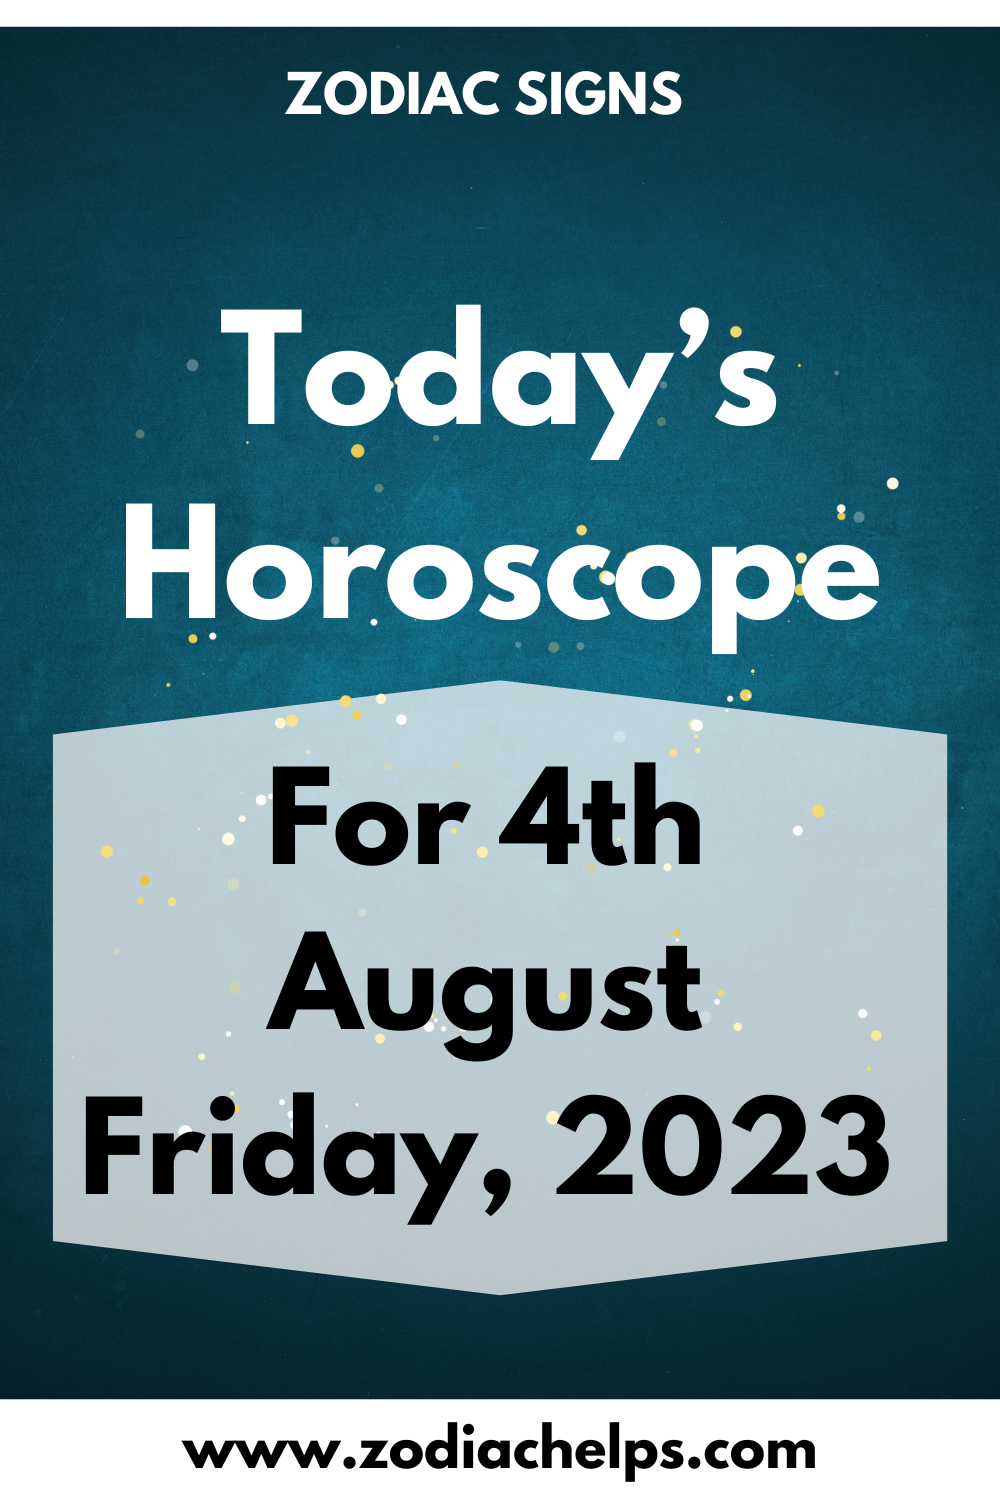 Today’s Horoscope for 4th August Friday, 2023